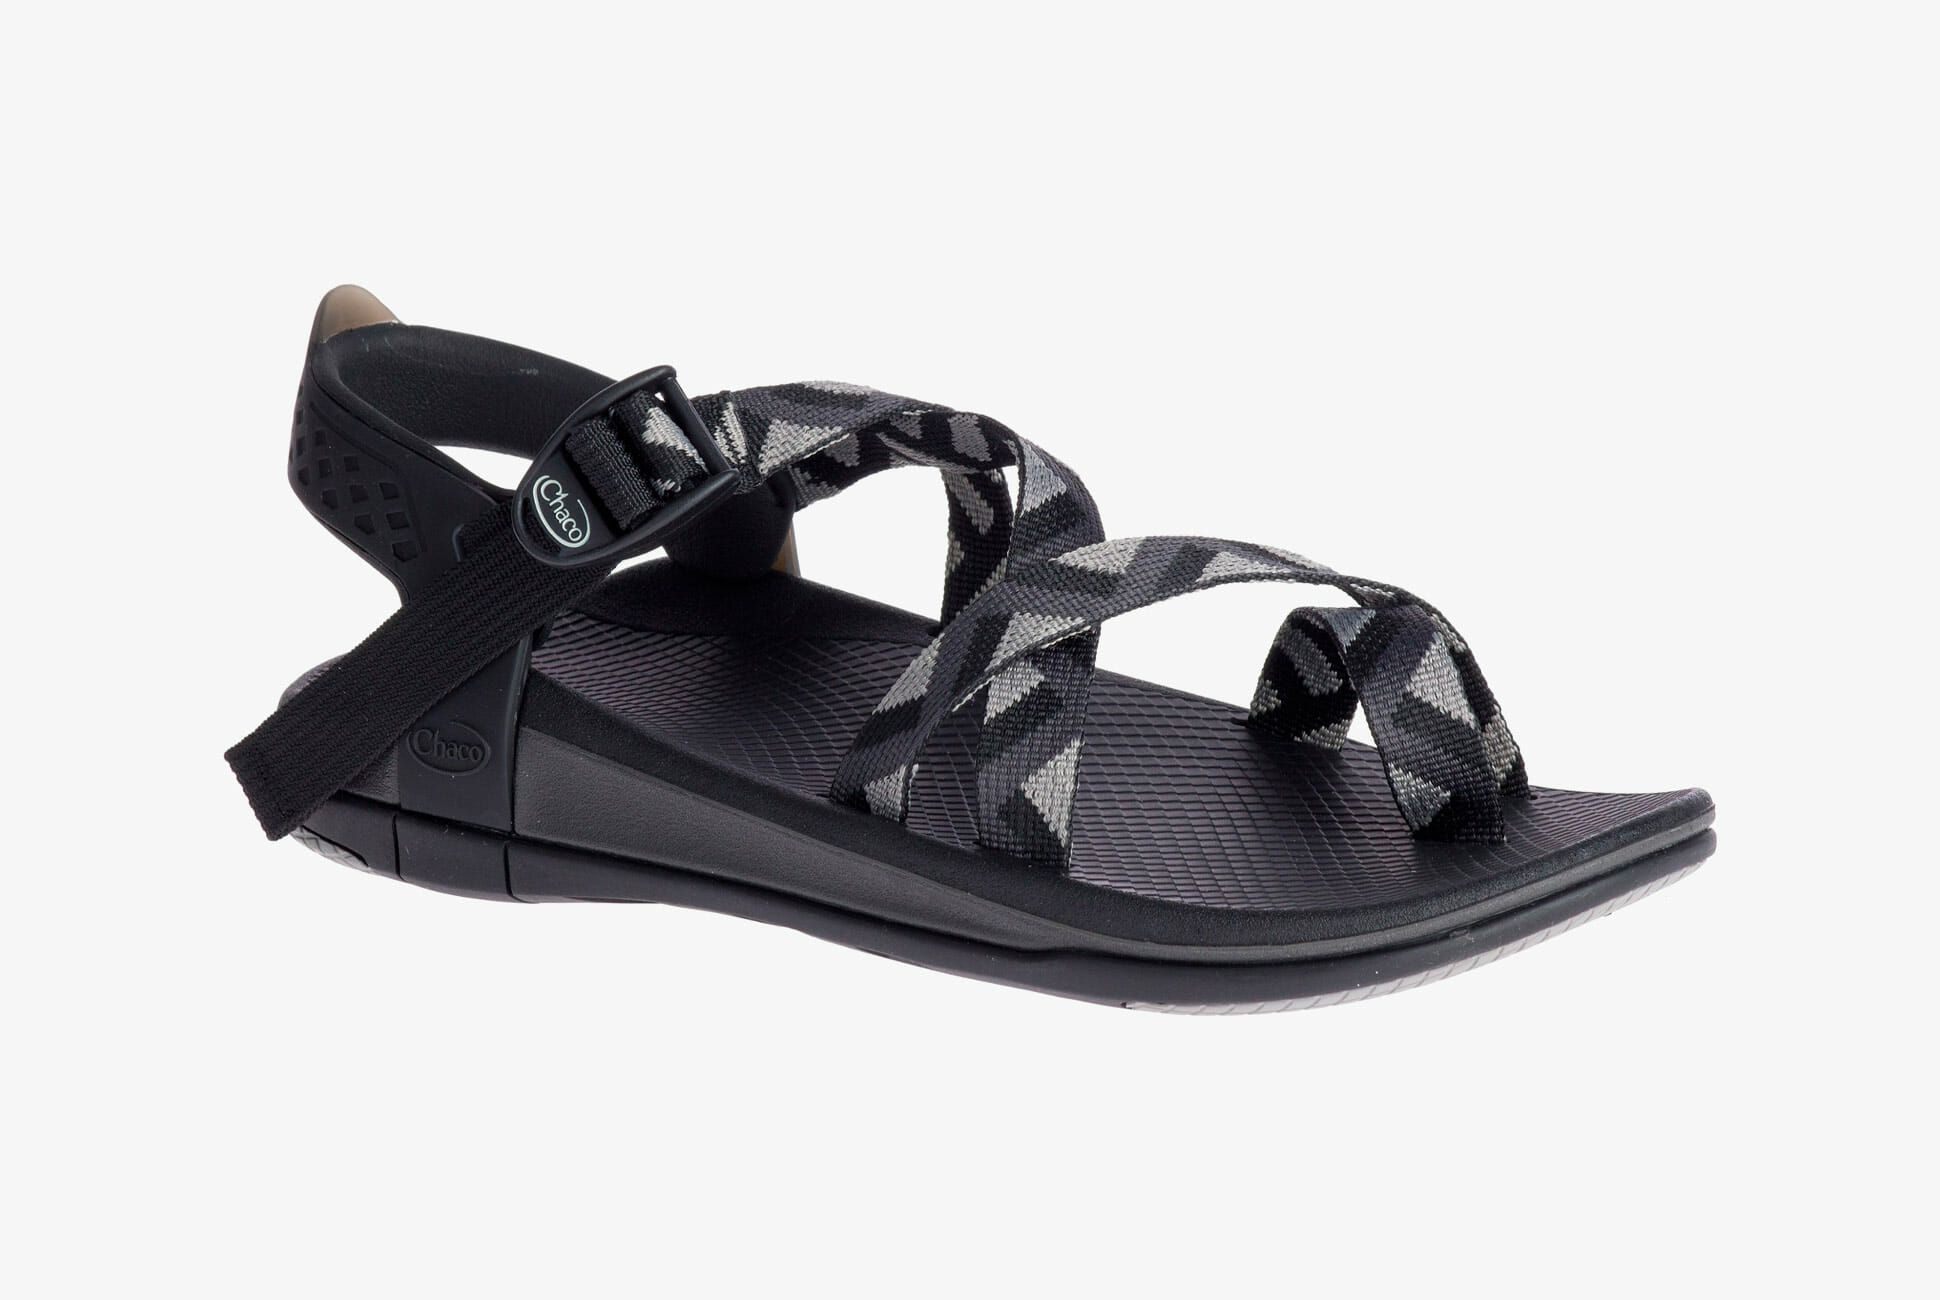 5 percent off chacos